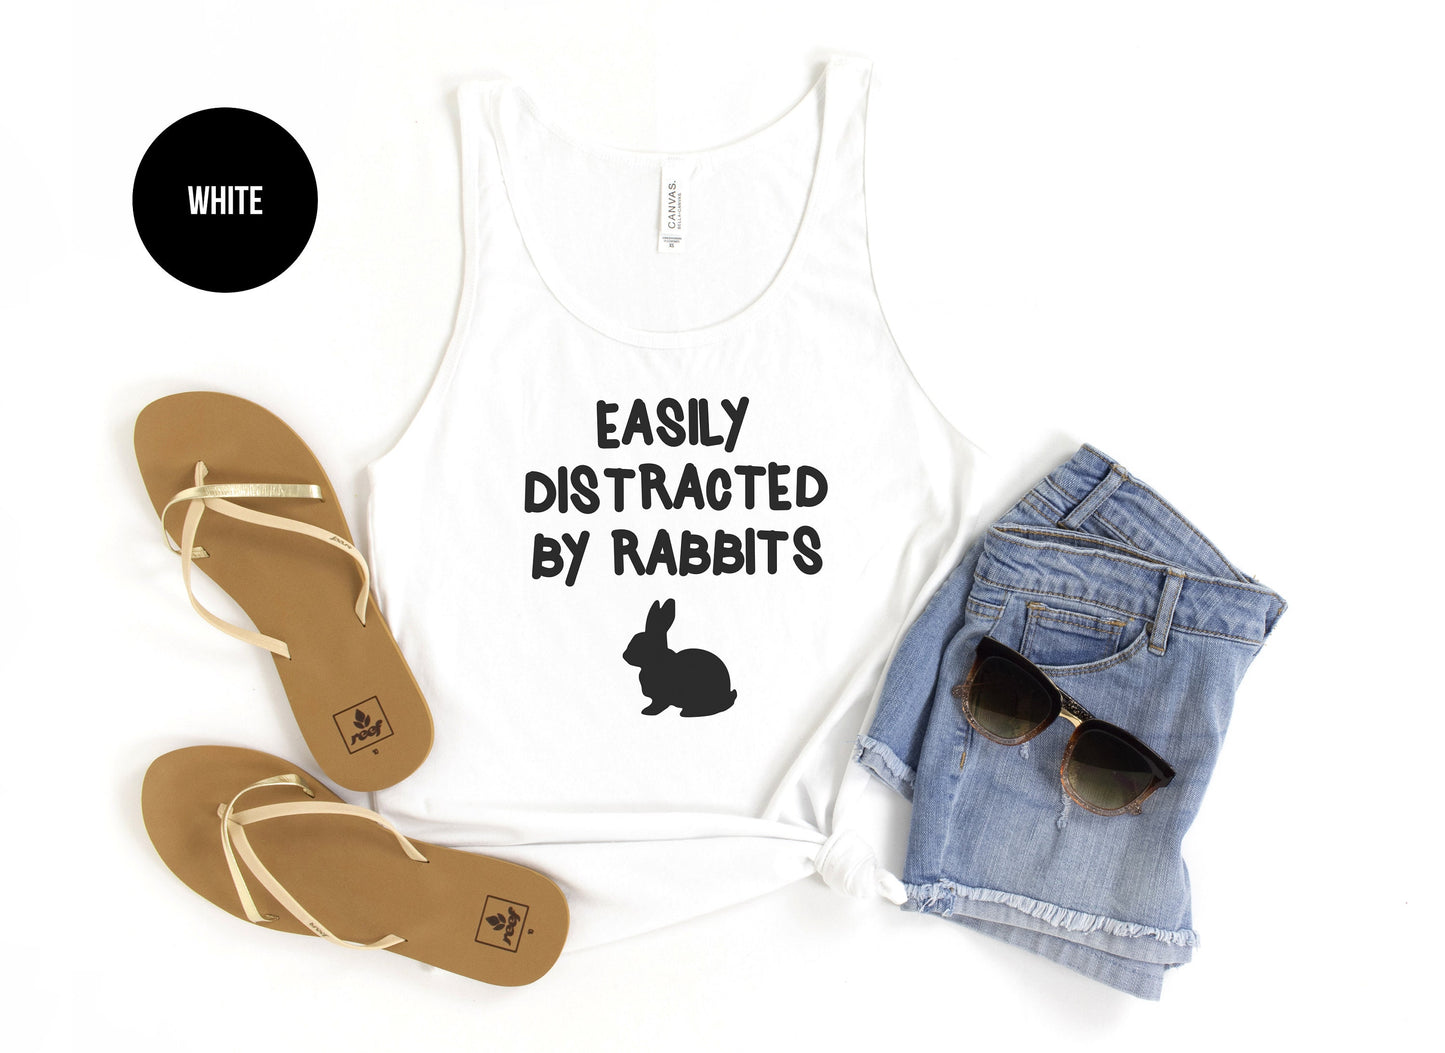 Easily Distracted By Rabbits Tank Top